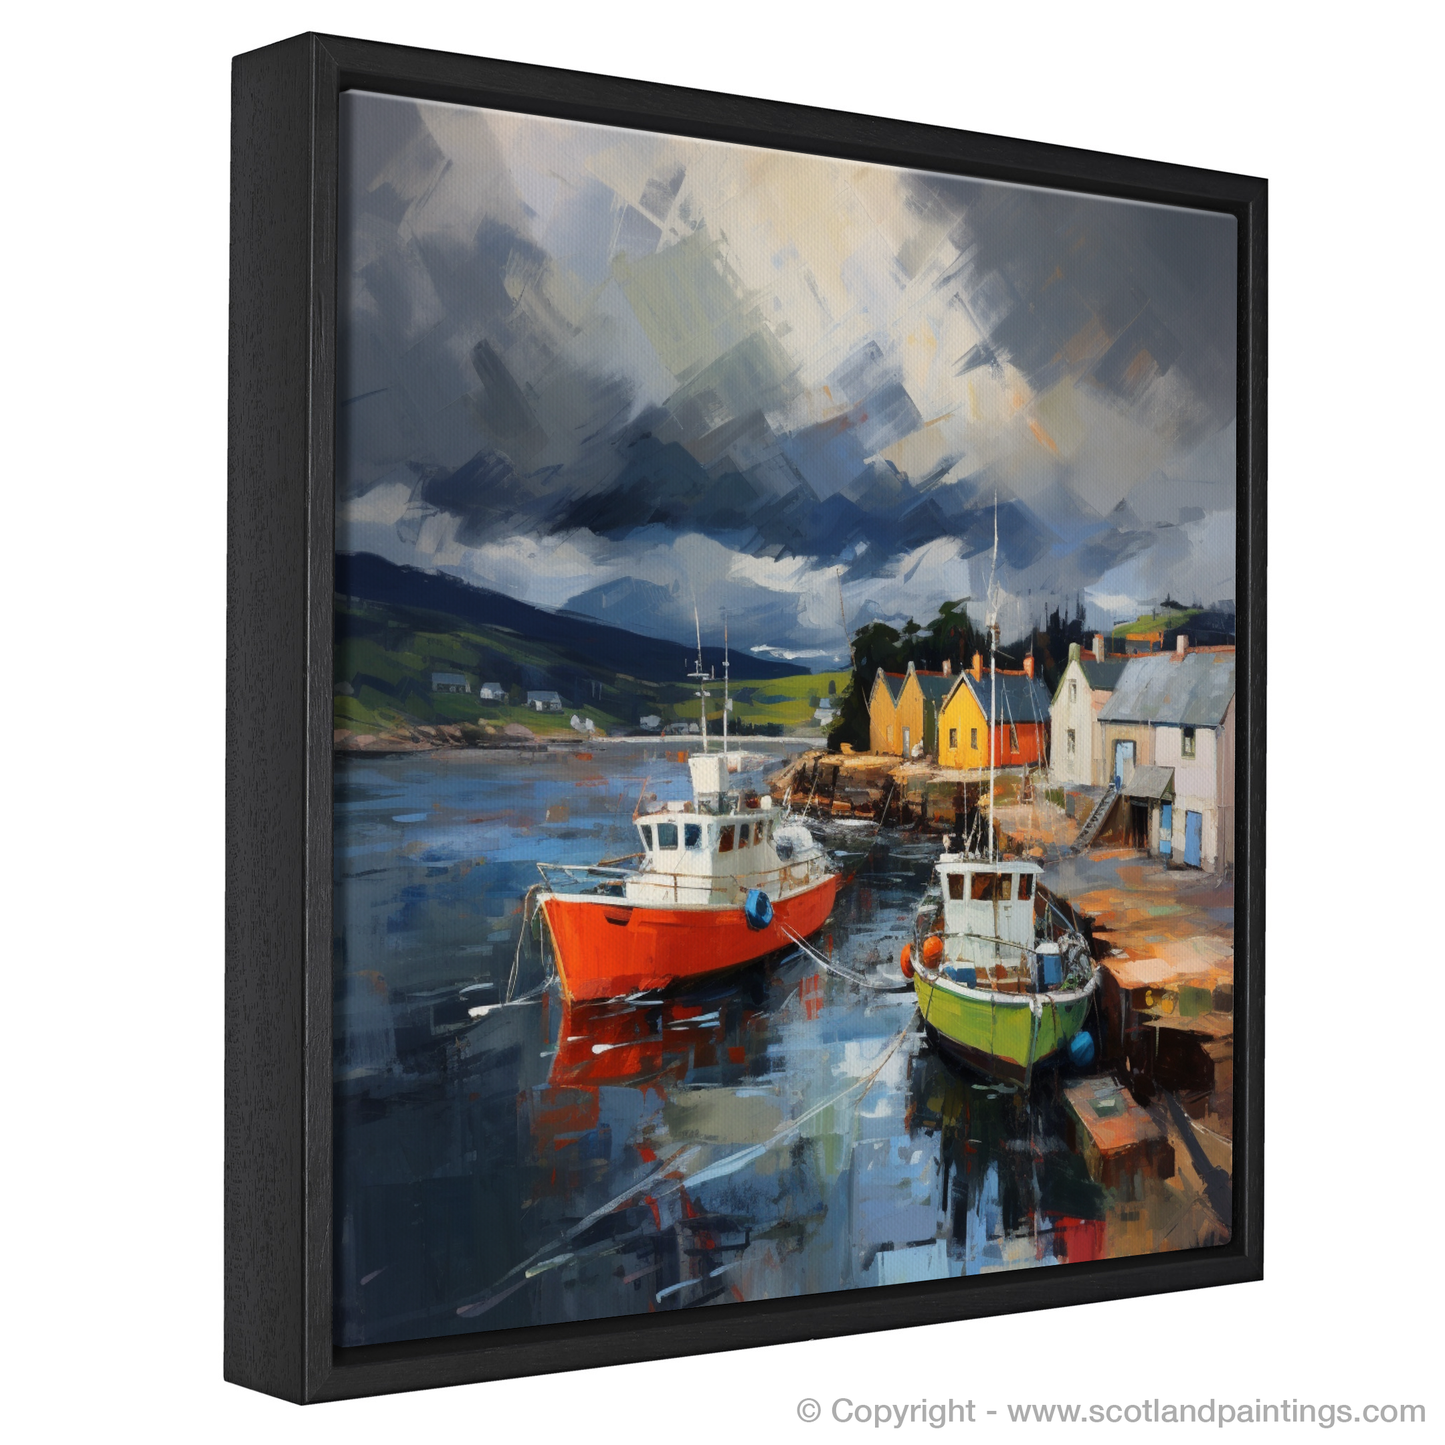 Painting and Art Print of Cromarty Harbour with a stormy sky entitled "Storm's Embrace over Cromarty Harbour".